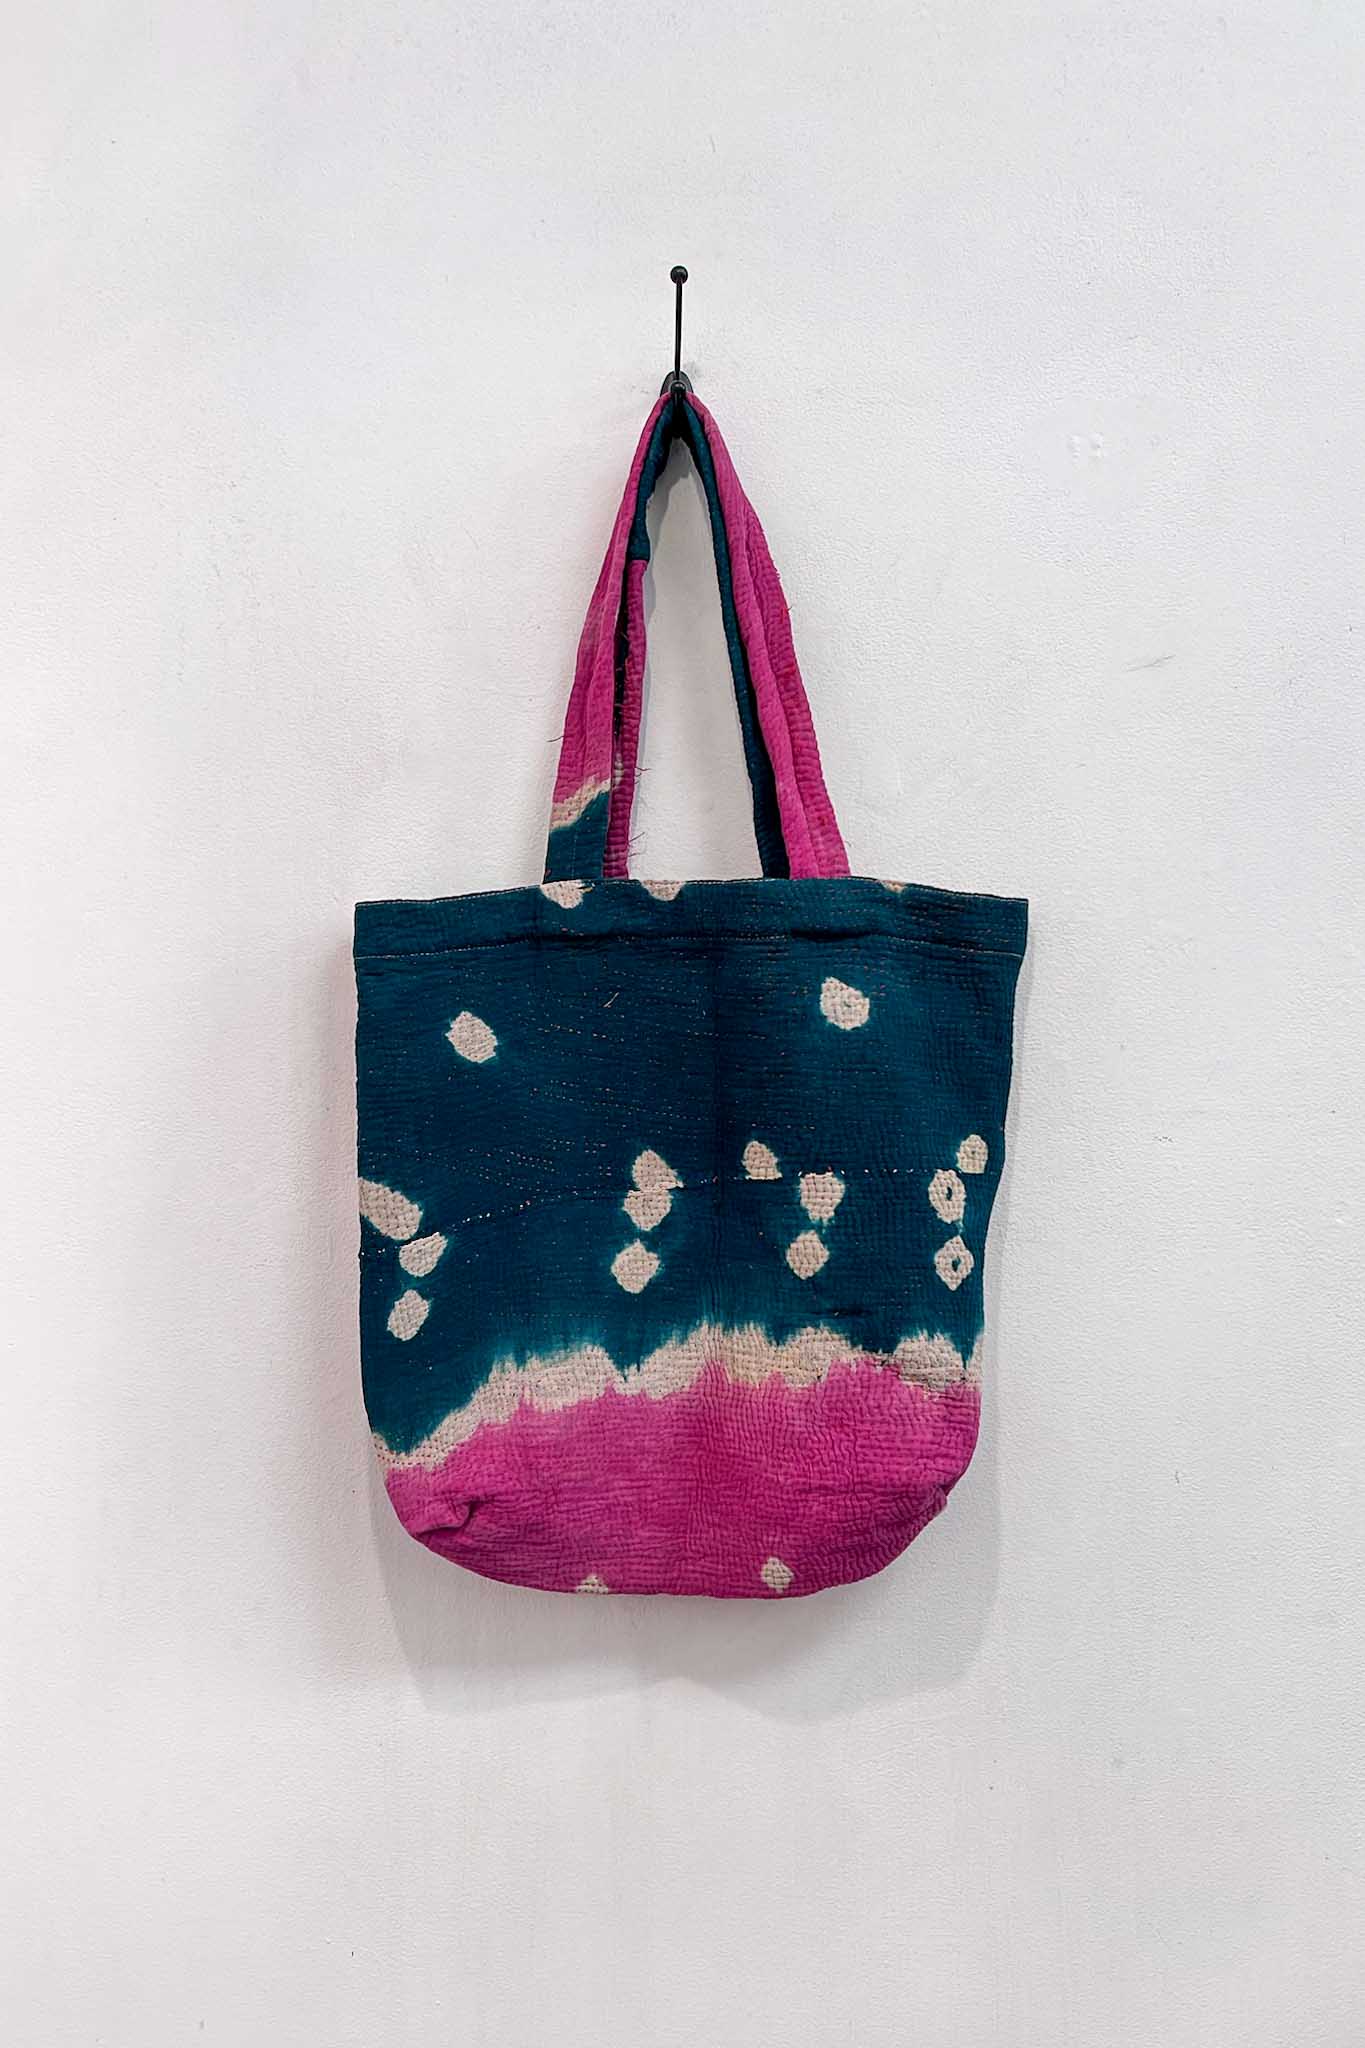 Vintage Kantha Tote - Tie Dye Accessories The Canyon